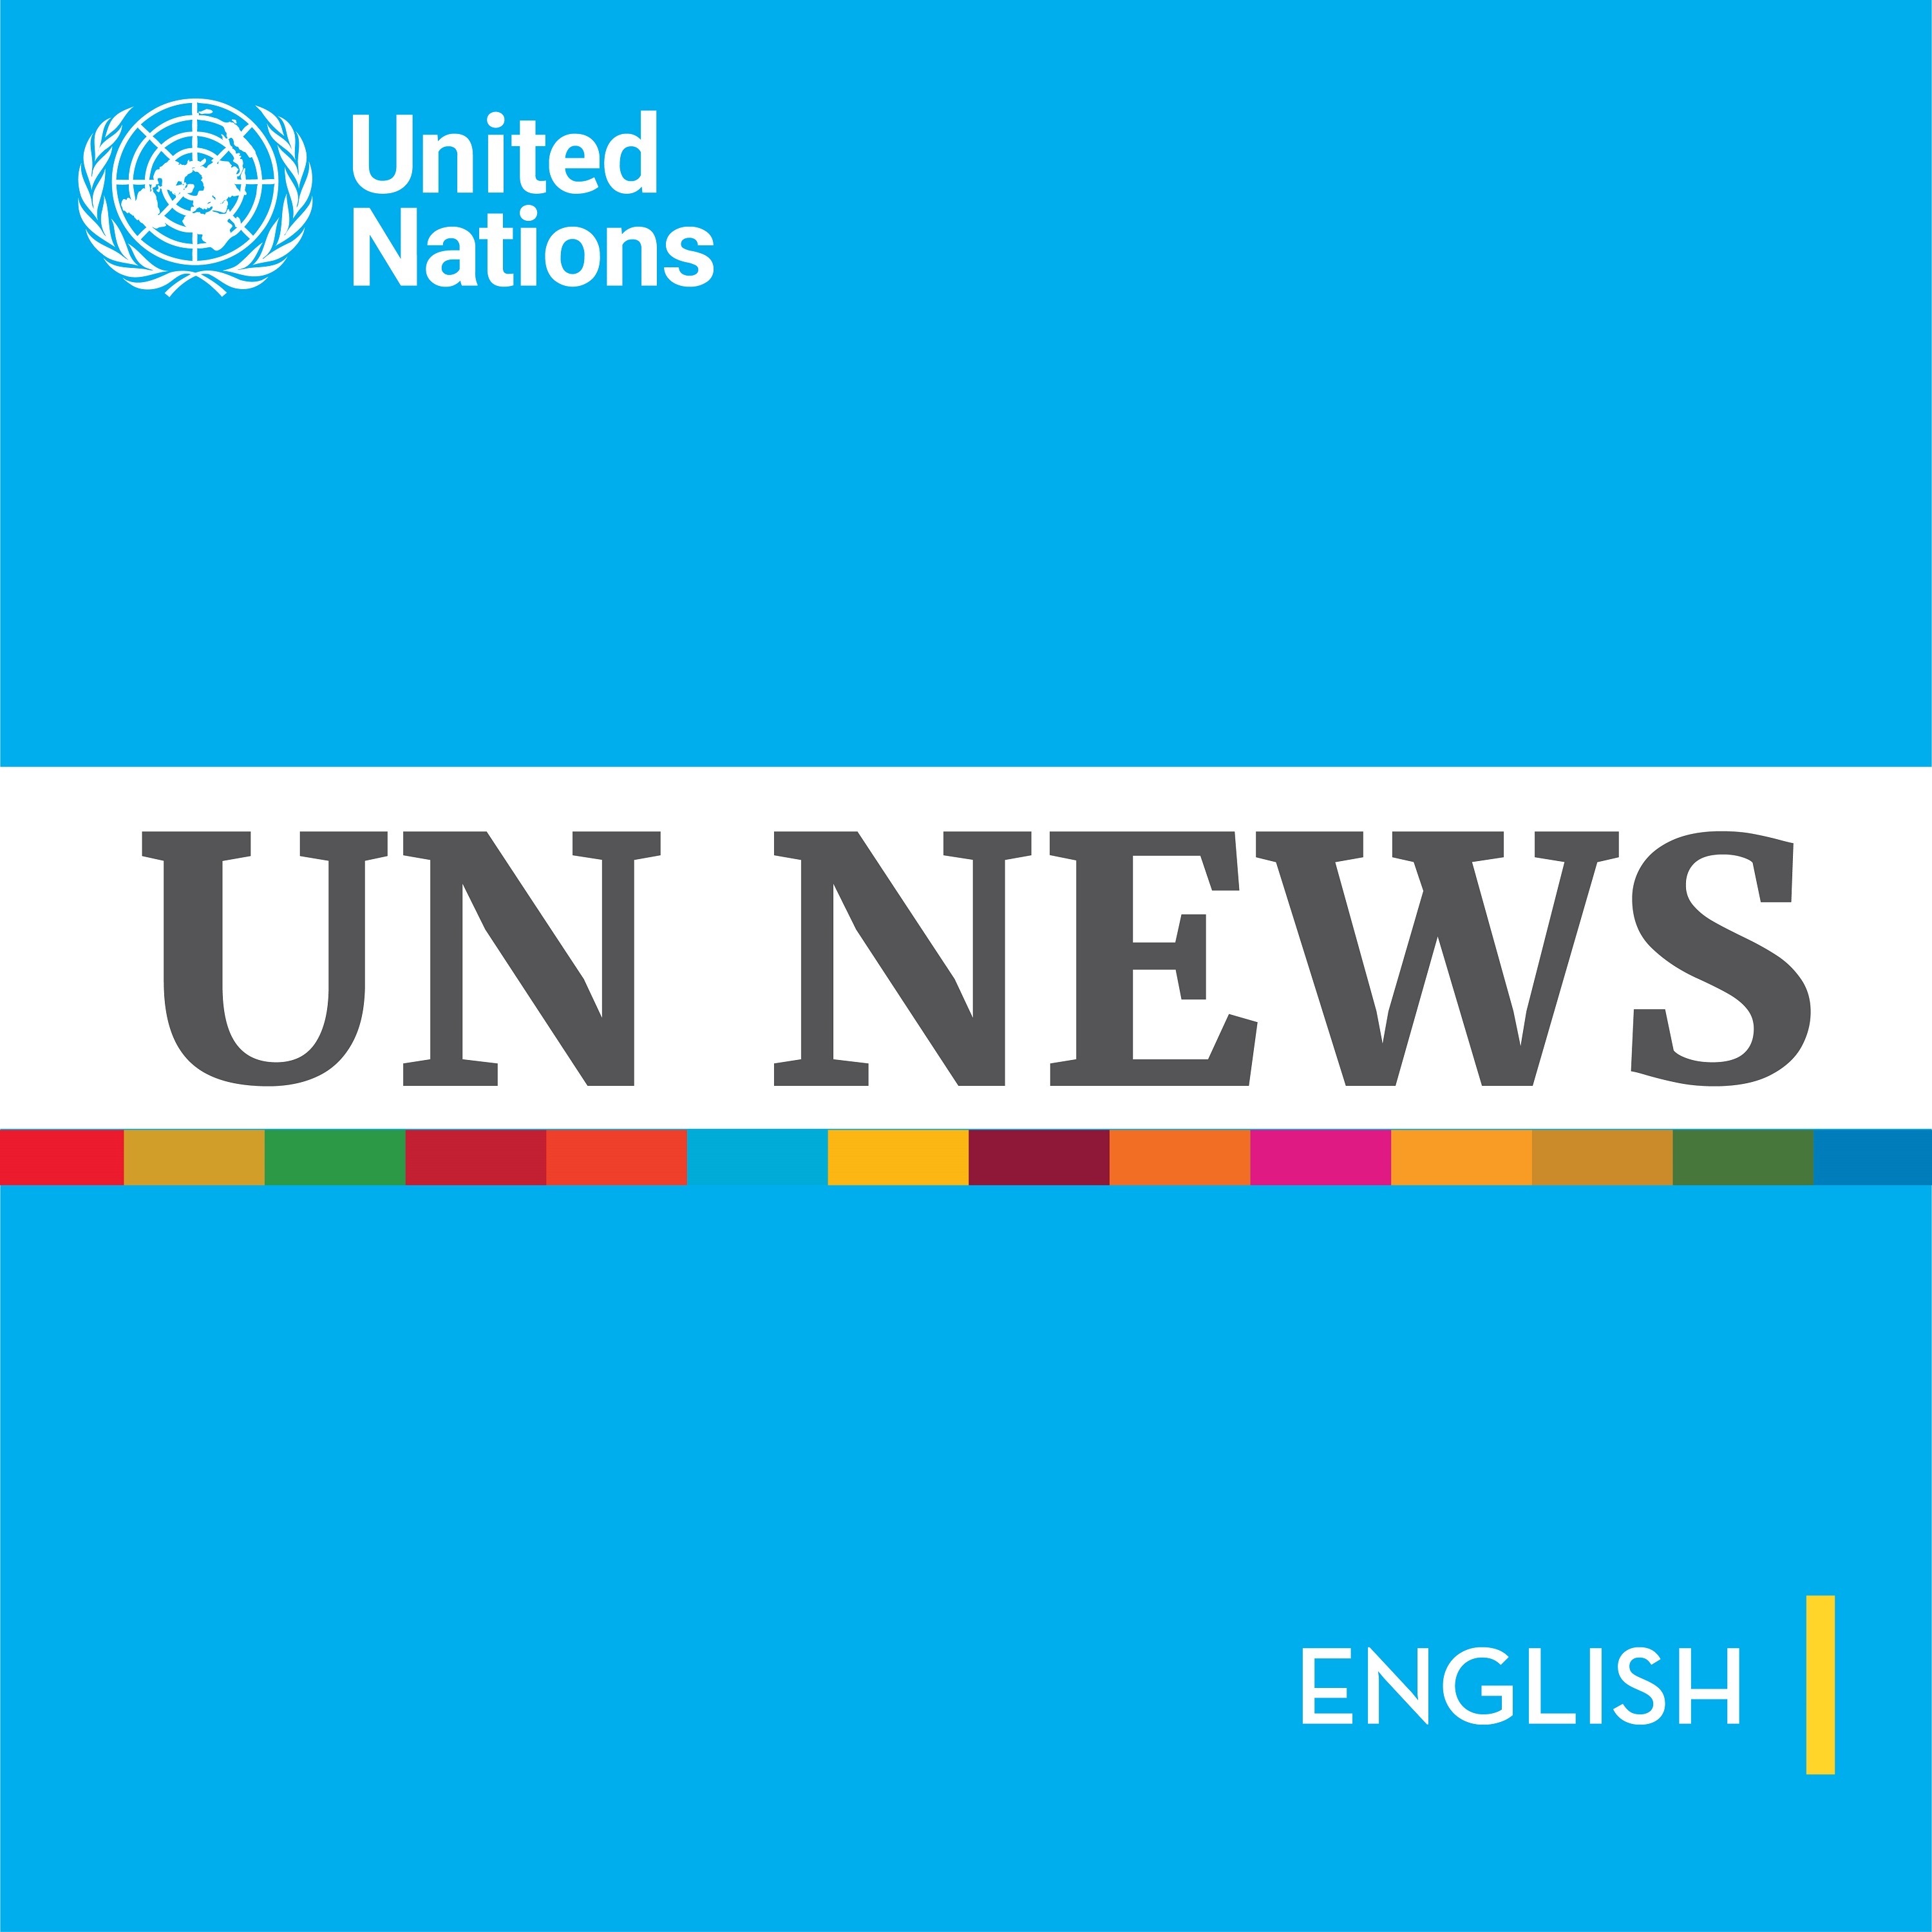 UN Catch-Up Dateline Geneva – Refugee vaccination, tackling systemic racism and Tigray